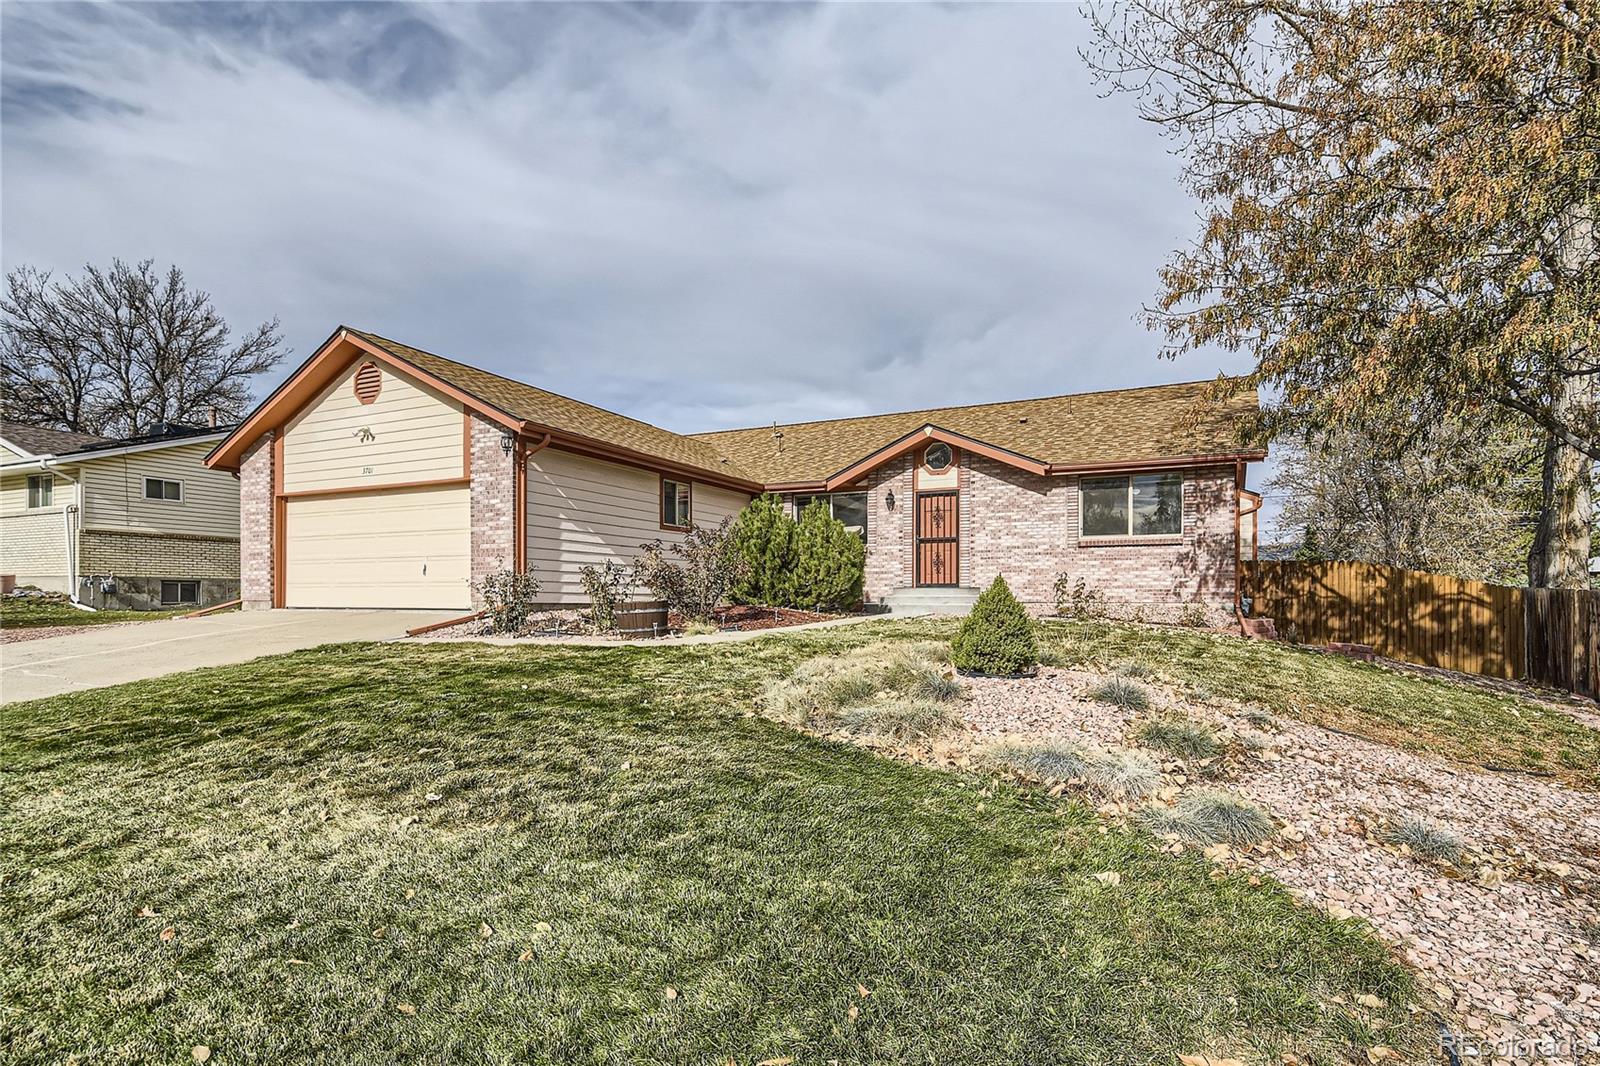 3701 w arrowhead road, littleton sold home. Closed on 2024-01-05 for $613,500.